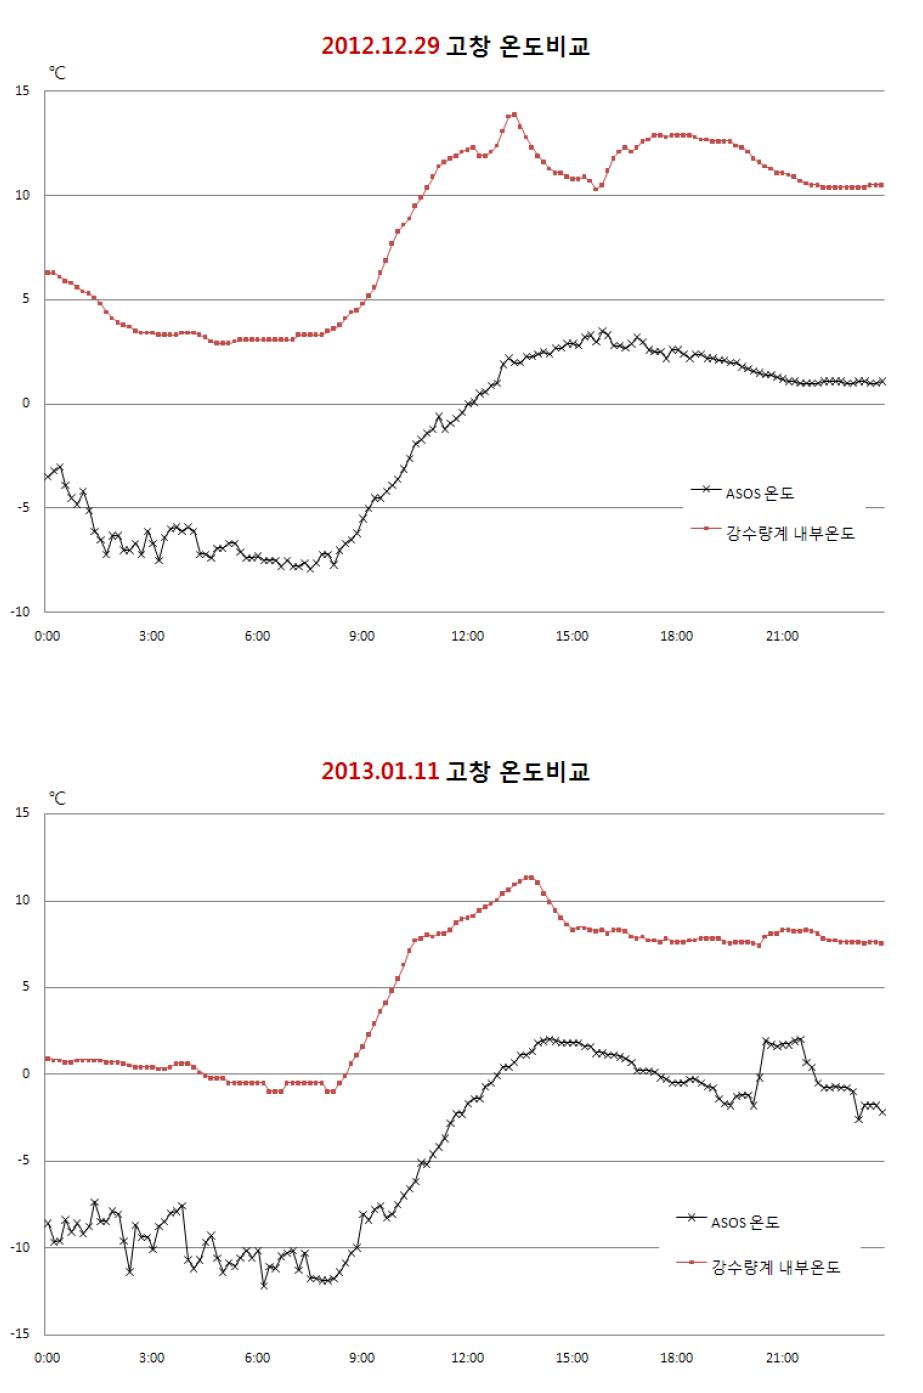 Comparison of outside(ASOS) and internal temperature at Gochang site